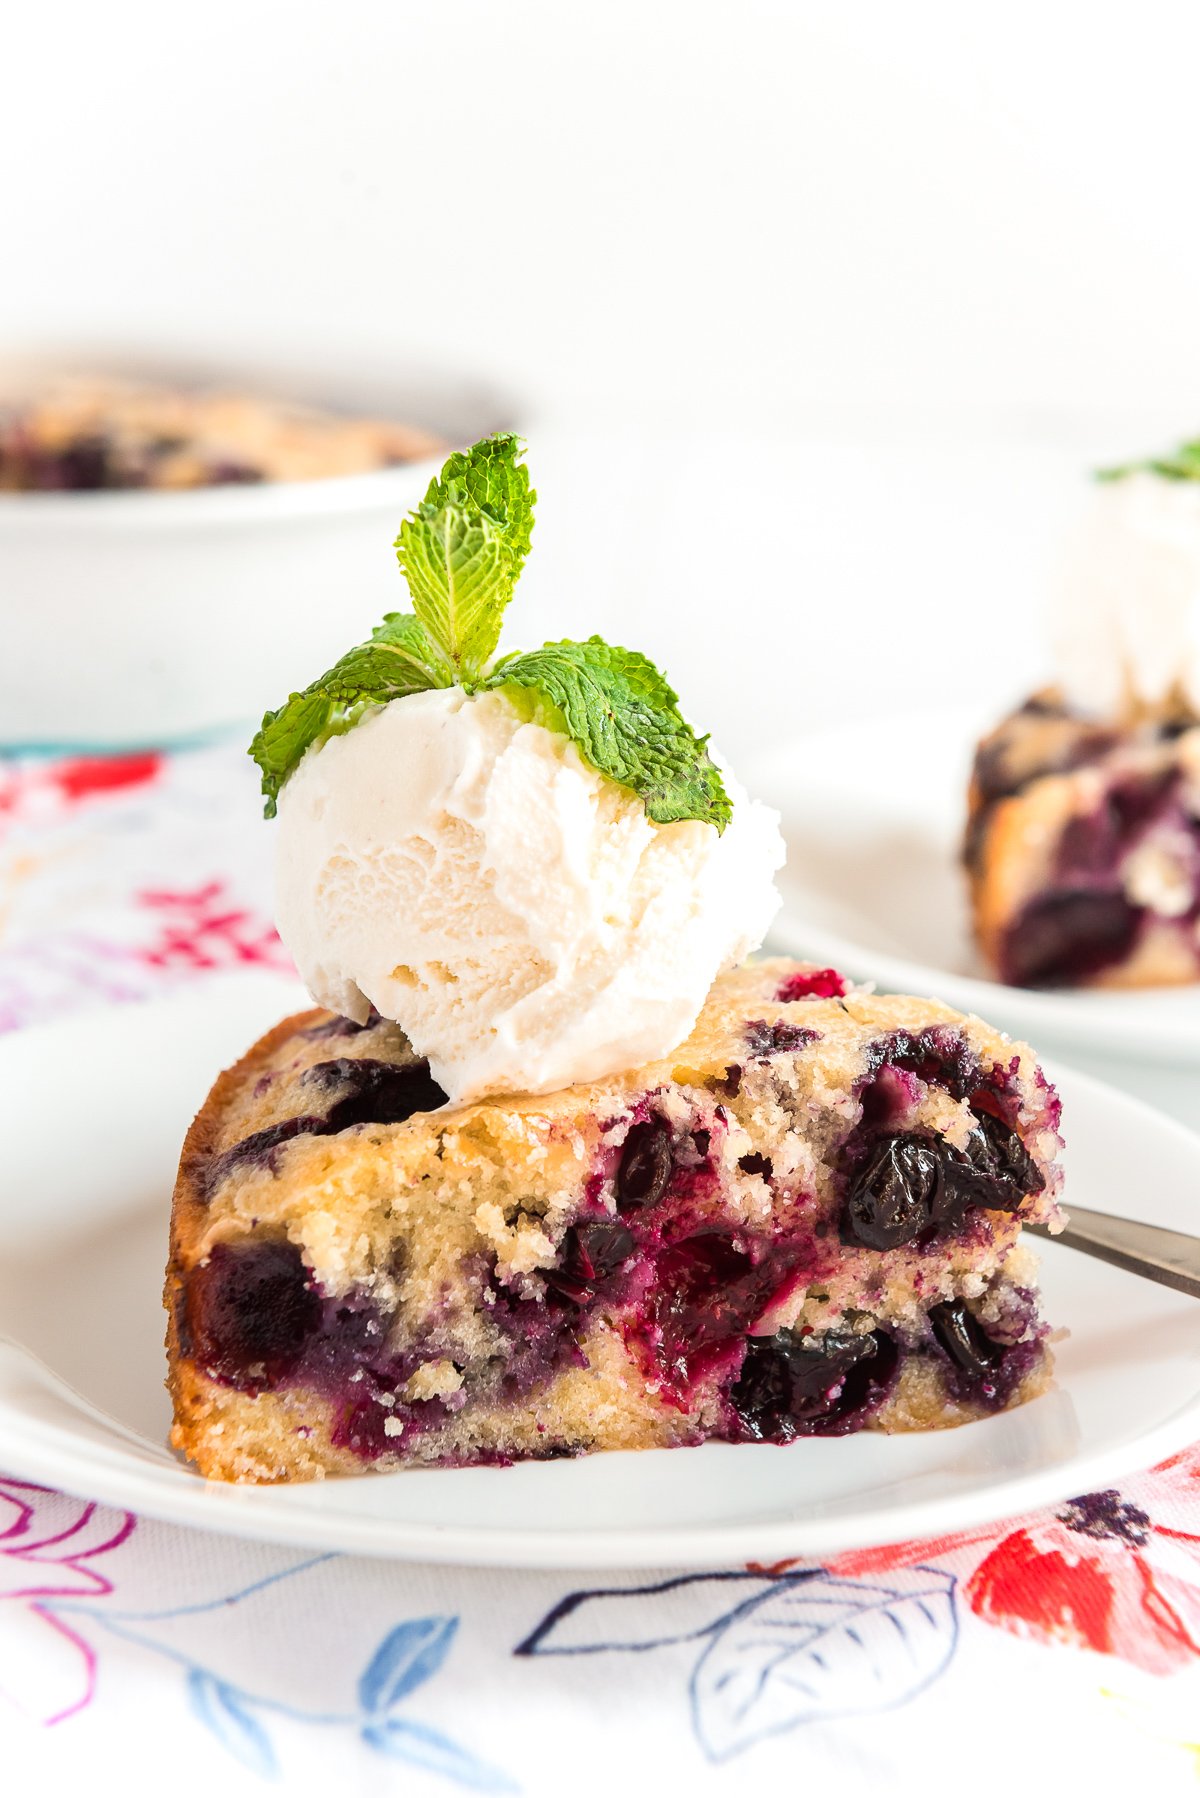 Slice of blueberry cake on a white plate with a scoop of vanilla ice cream on top.